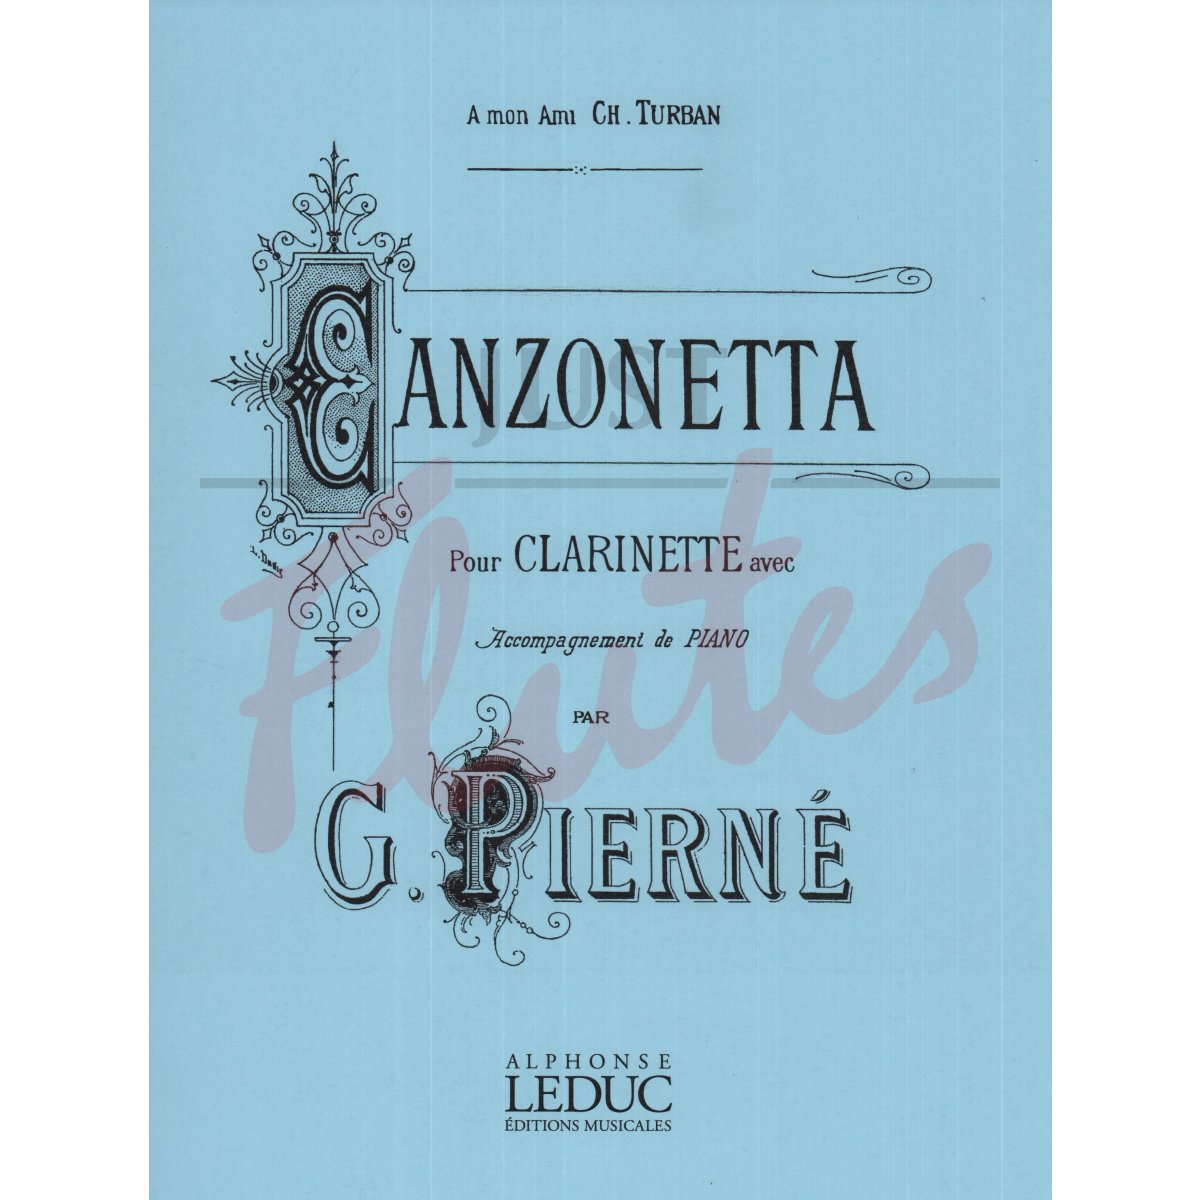 Canzonetta for Clarinet and Piano